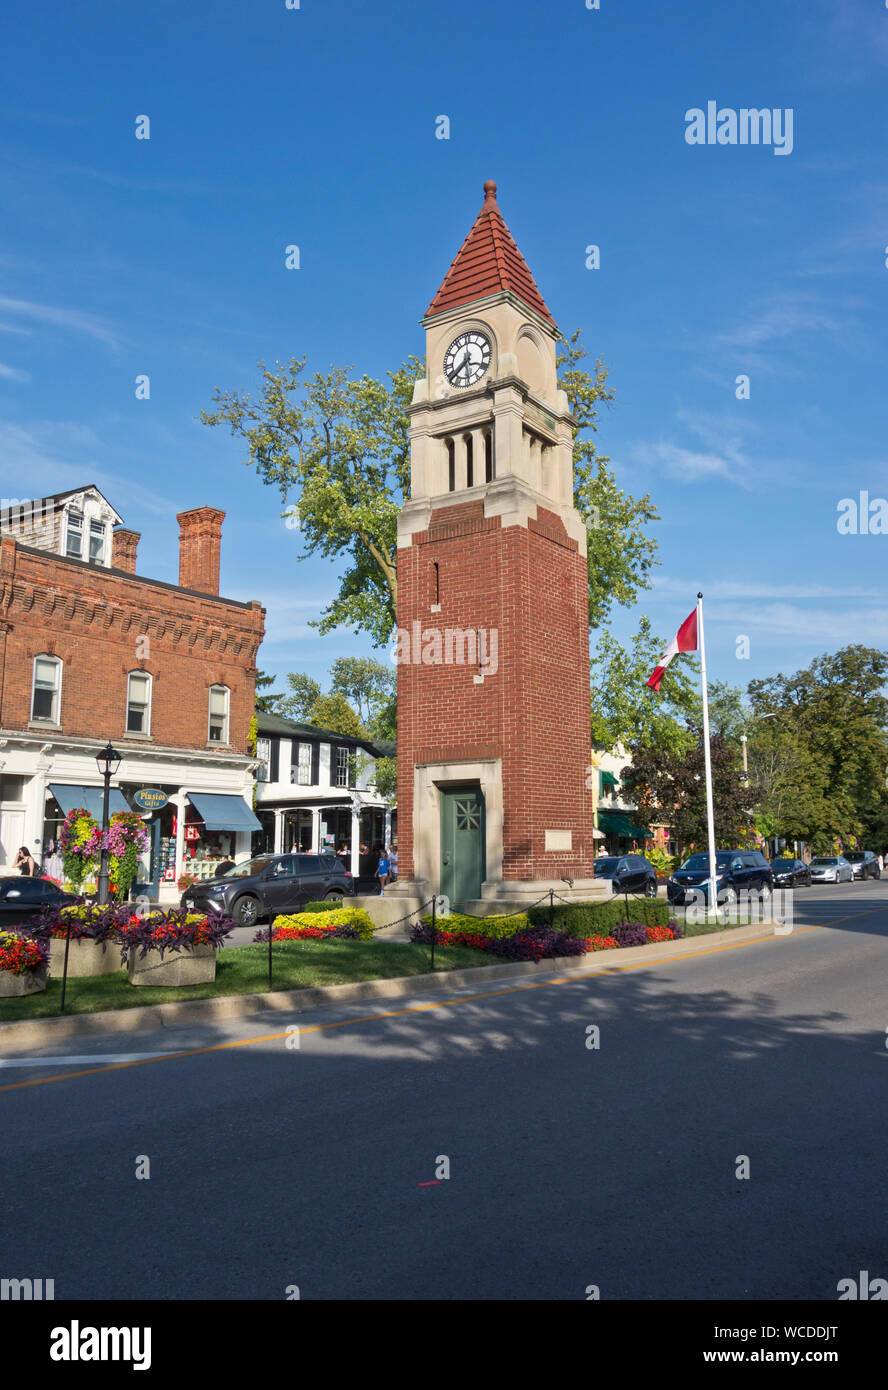 Memorial Clock Tower in Niagara-On-The-Lake, Ontario, Canada.  Queen street with shops and restaurants in Niagara, On the Lake, ON. Stock Photo